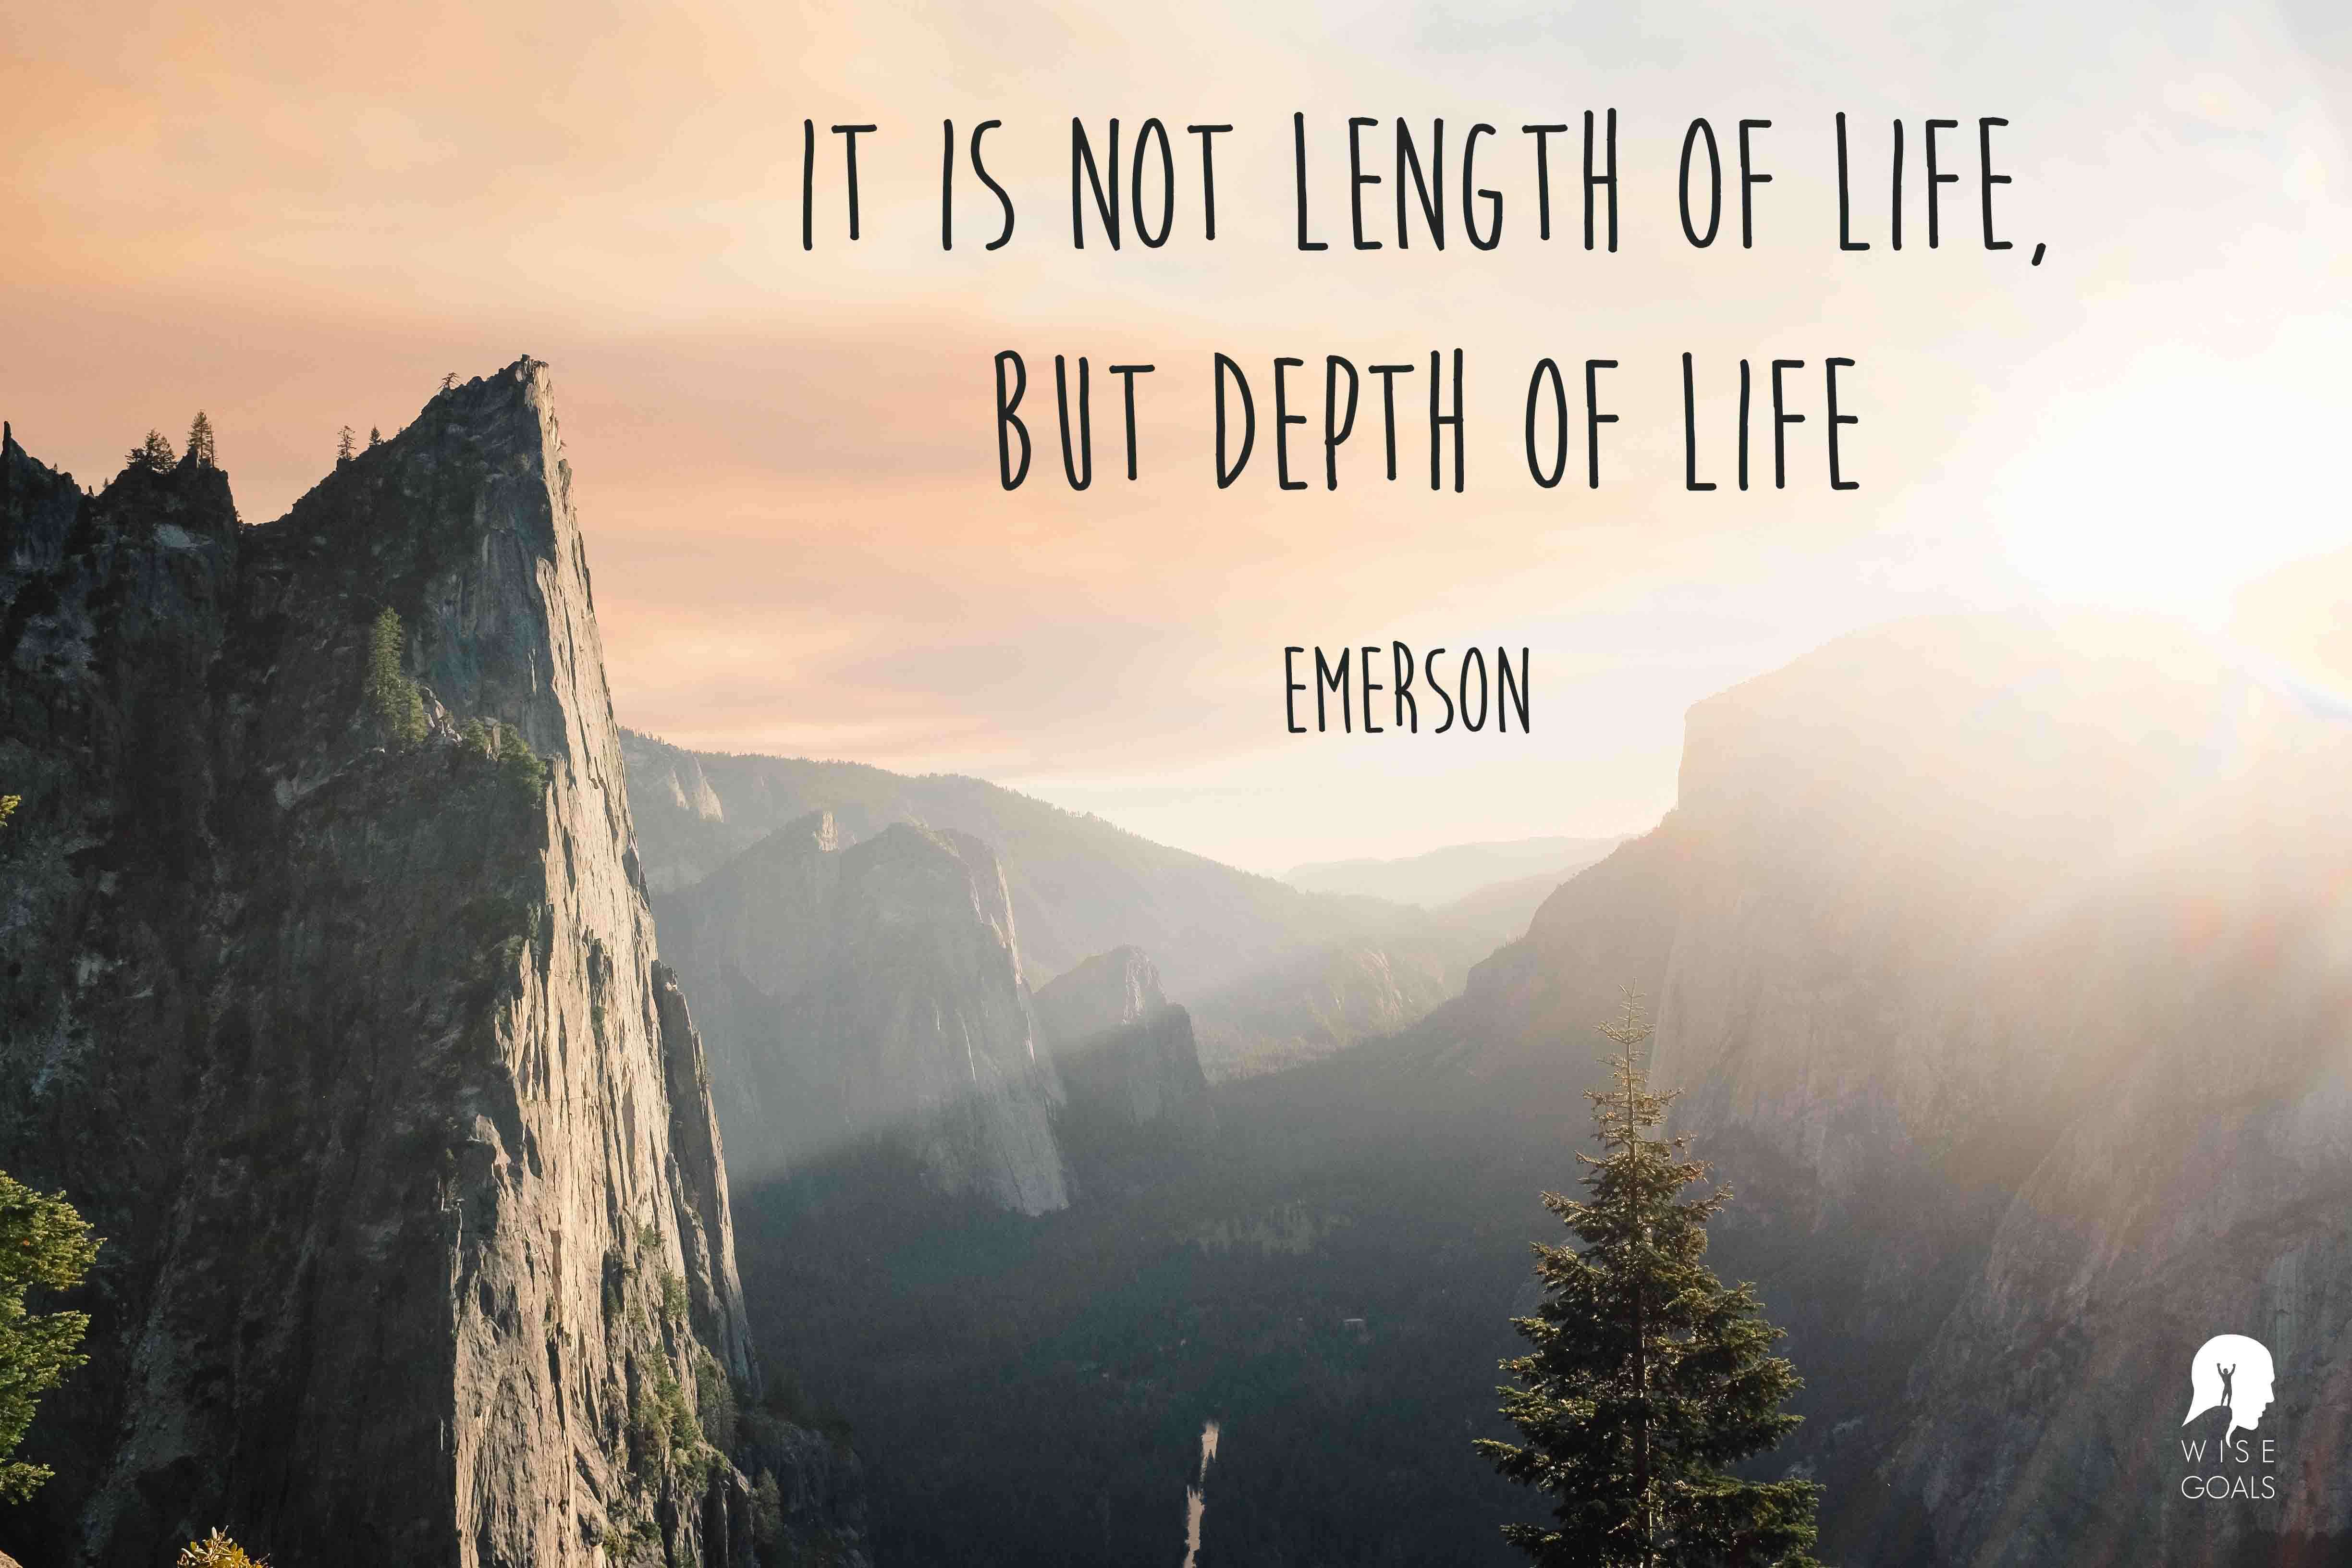 Emerson - It is not length of life, but depth of life quote